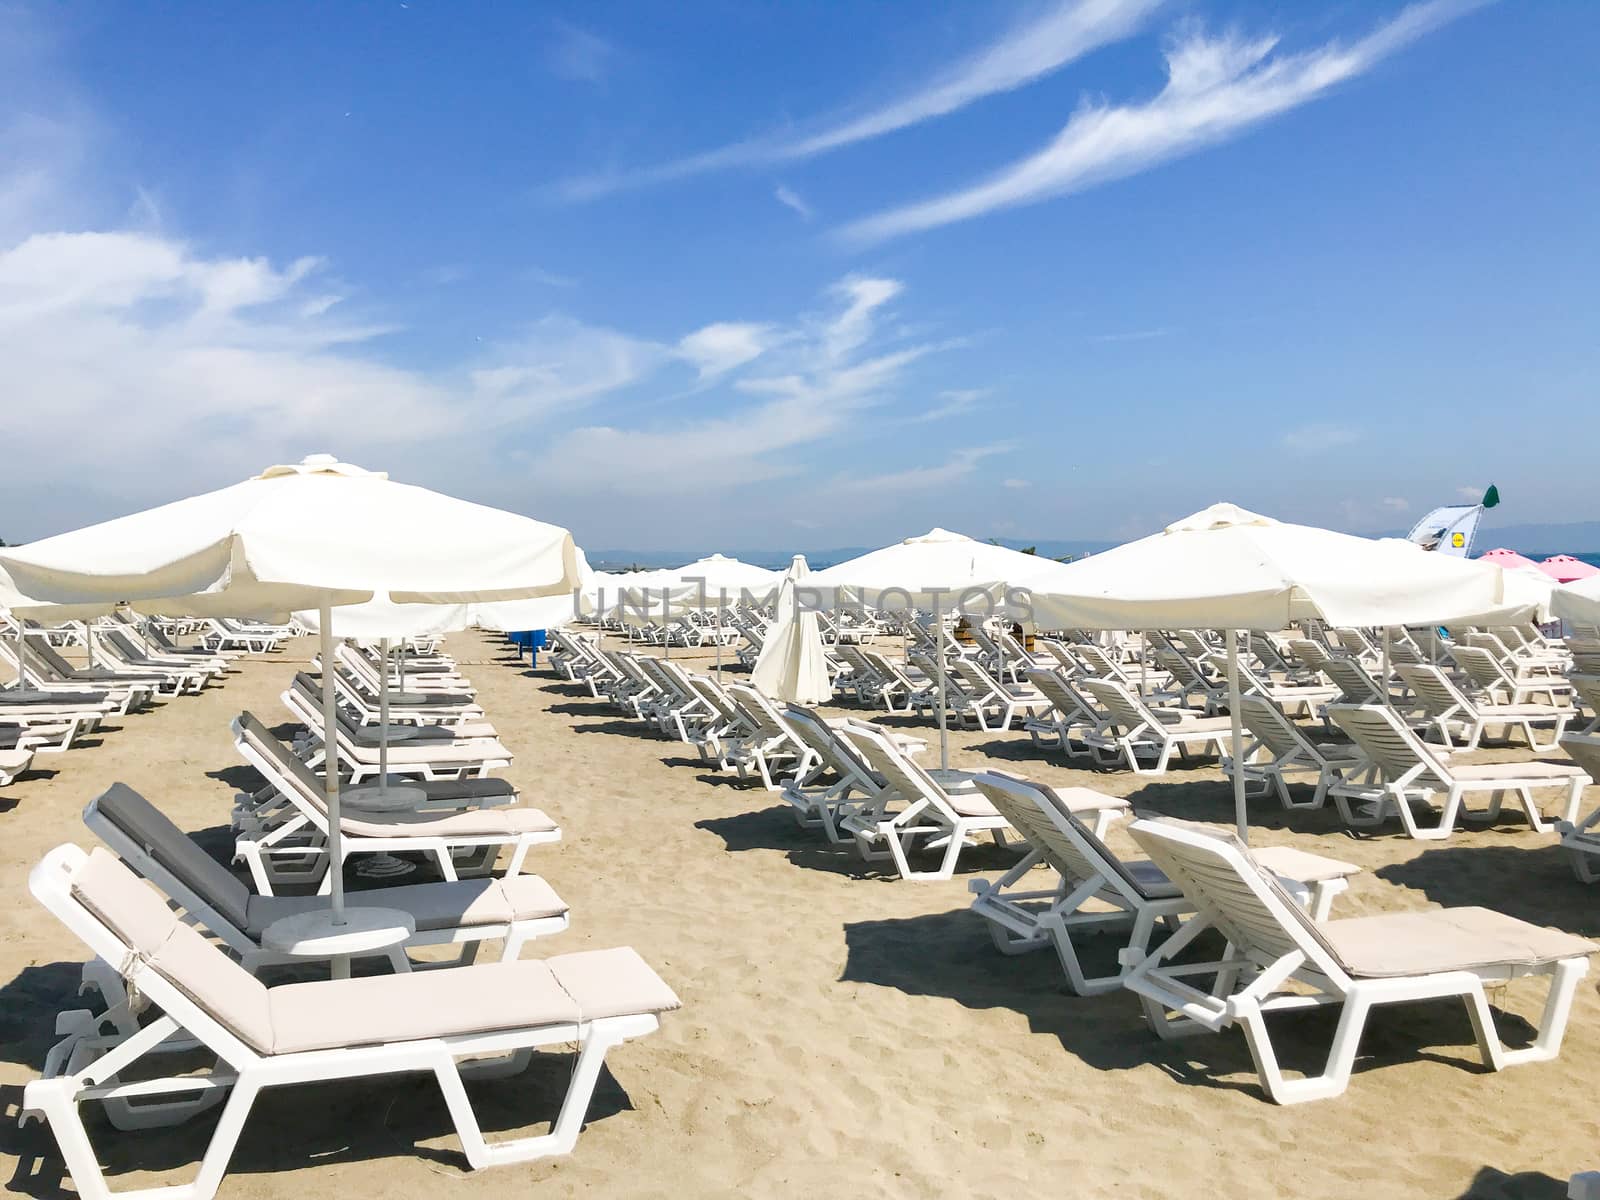 White Loungers And Umbrellas At The Beach In Pomorie, Bulgaria. by nenovbrothers